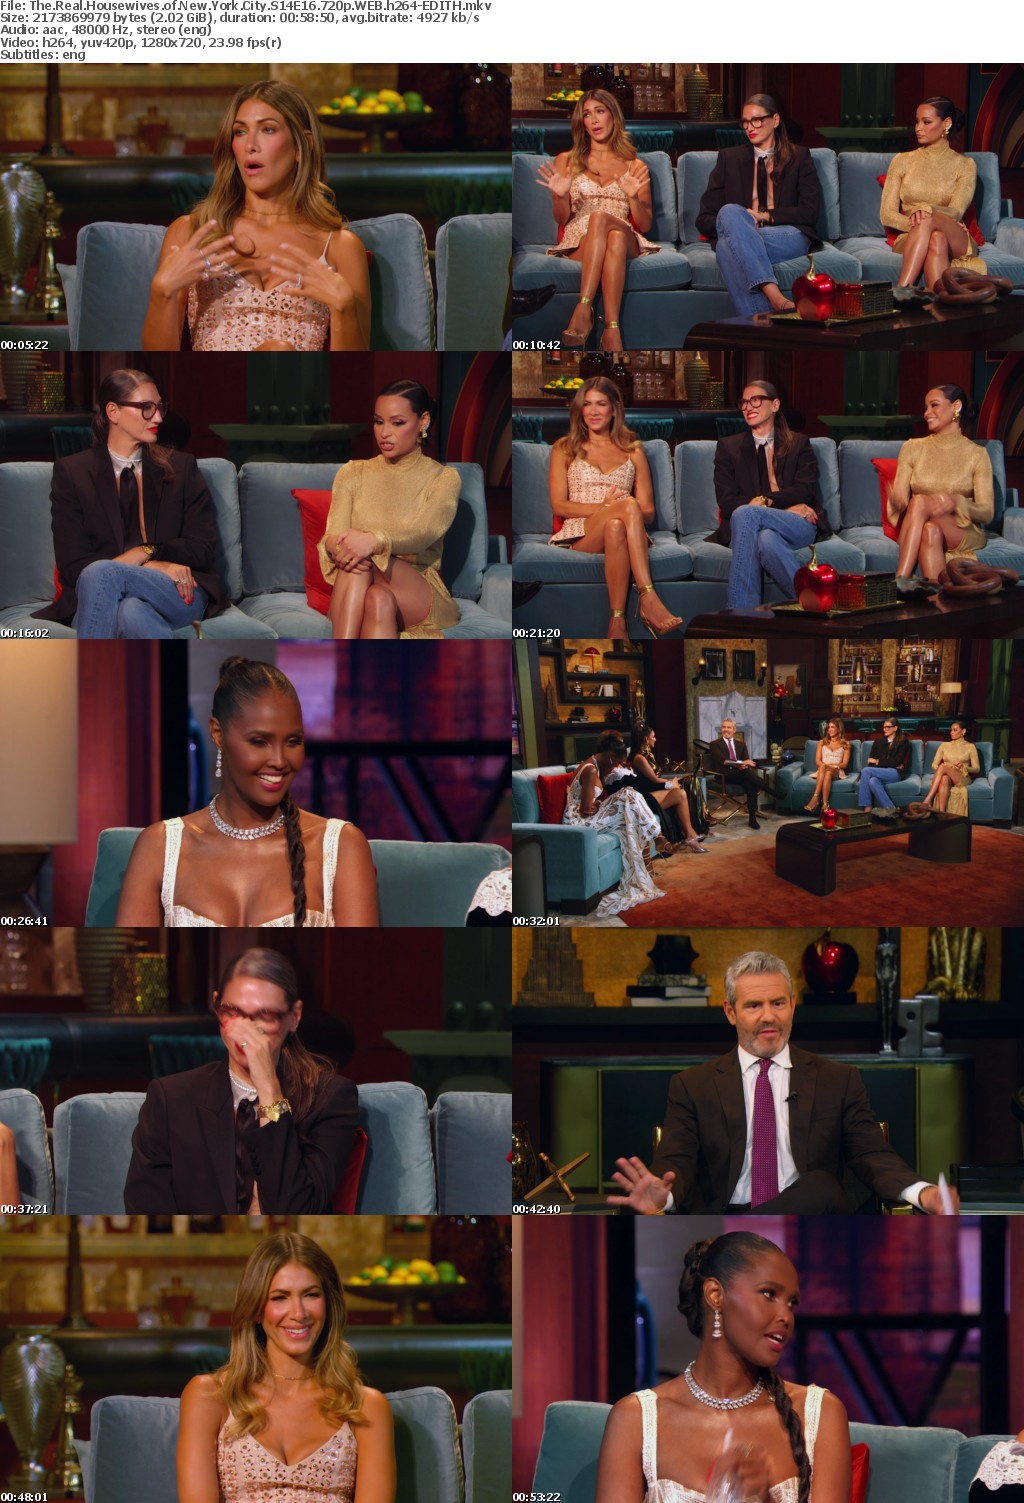 The Real Housewives of New York City S14E16 720p WEB h264-EDITH